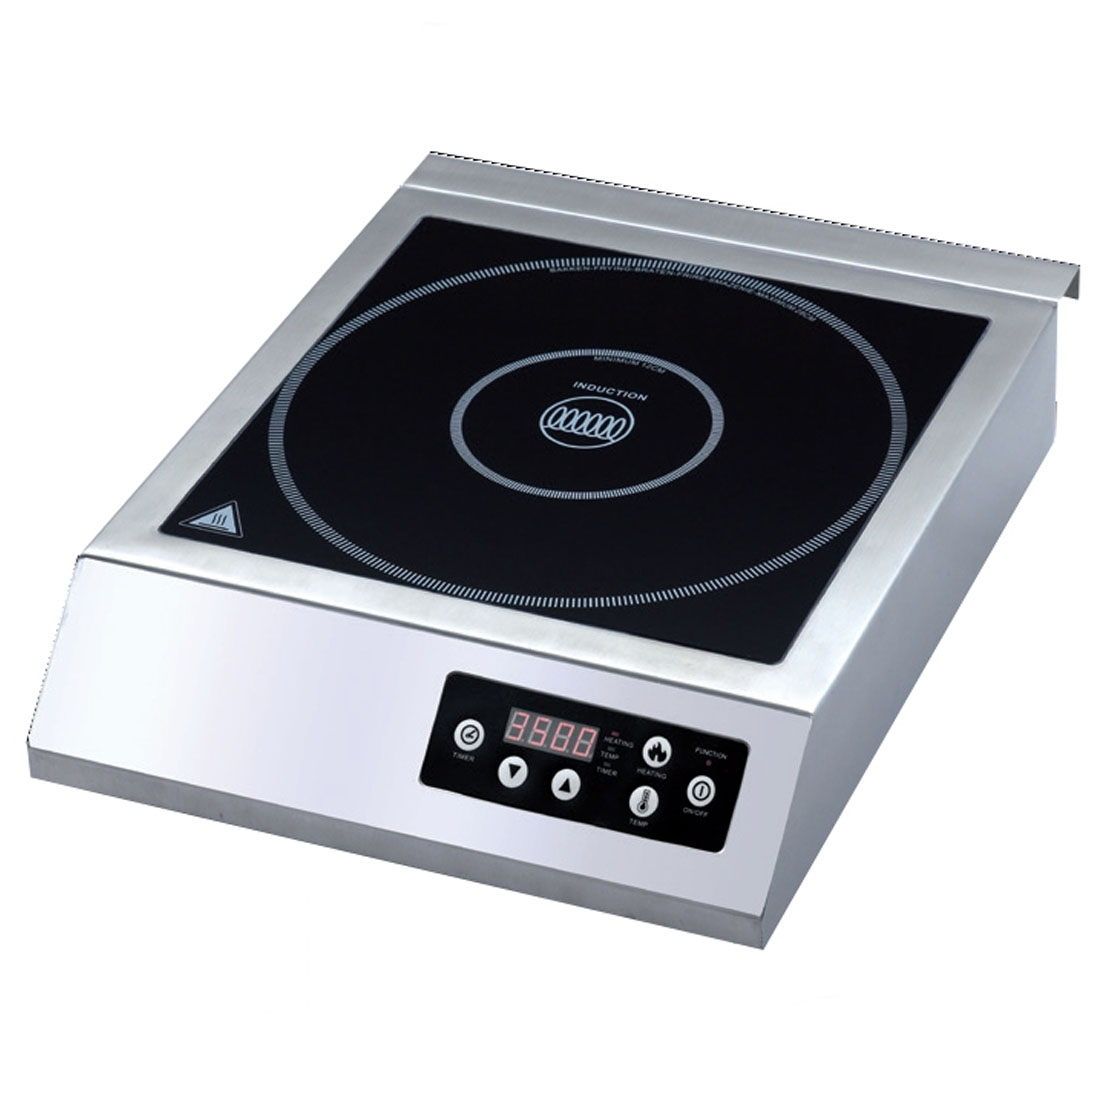 Commercial Schott Ceran Glass Hob Induction Plate - BH3500S